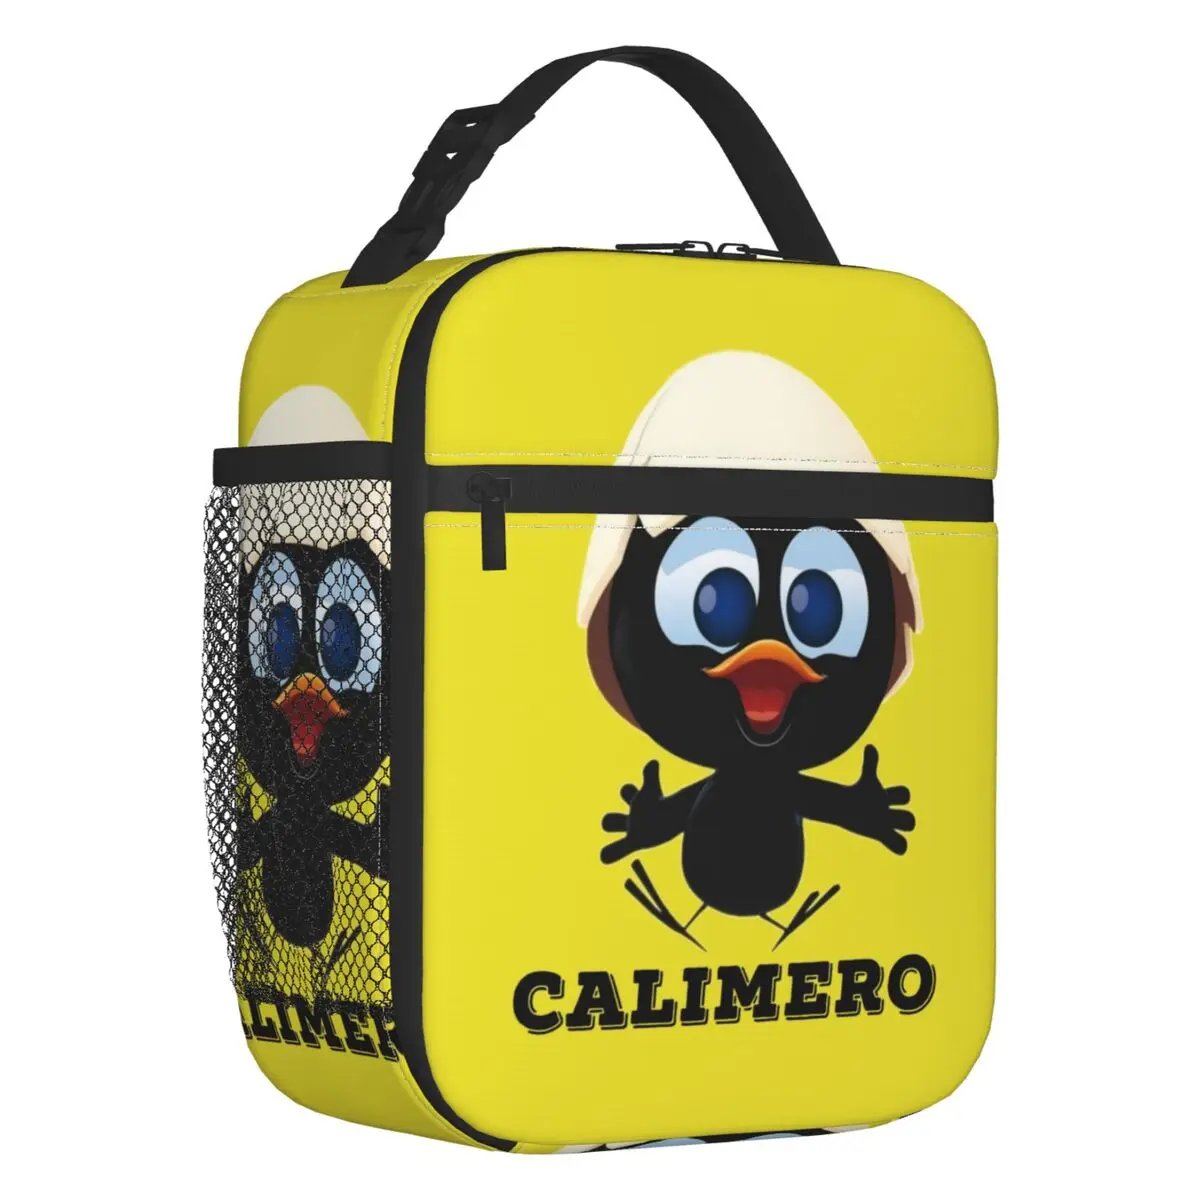 Cute Cartoon Chiken Calimero Insulated Lunch Tote Bag for Women Portable Cooler Thermal Food Lunch Box School